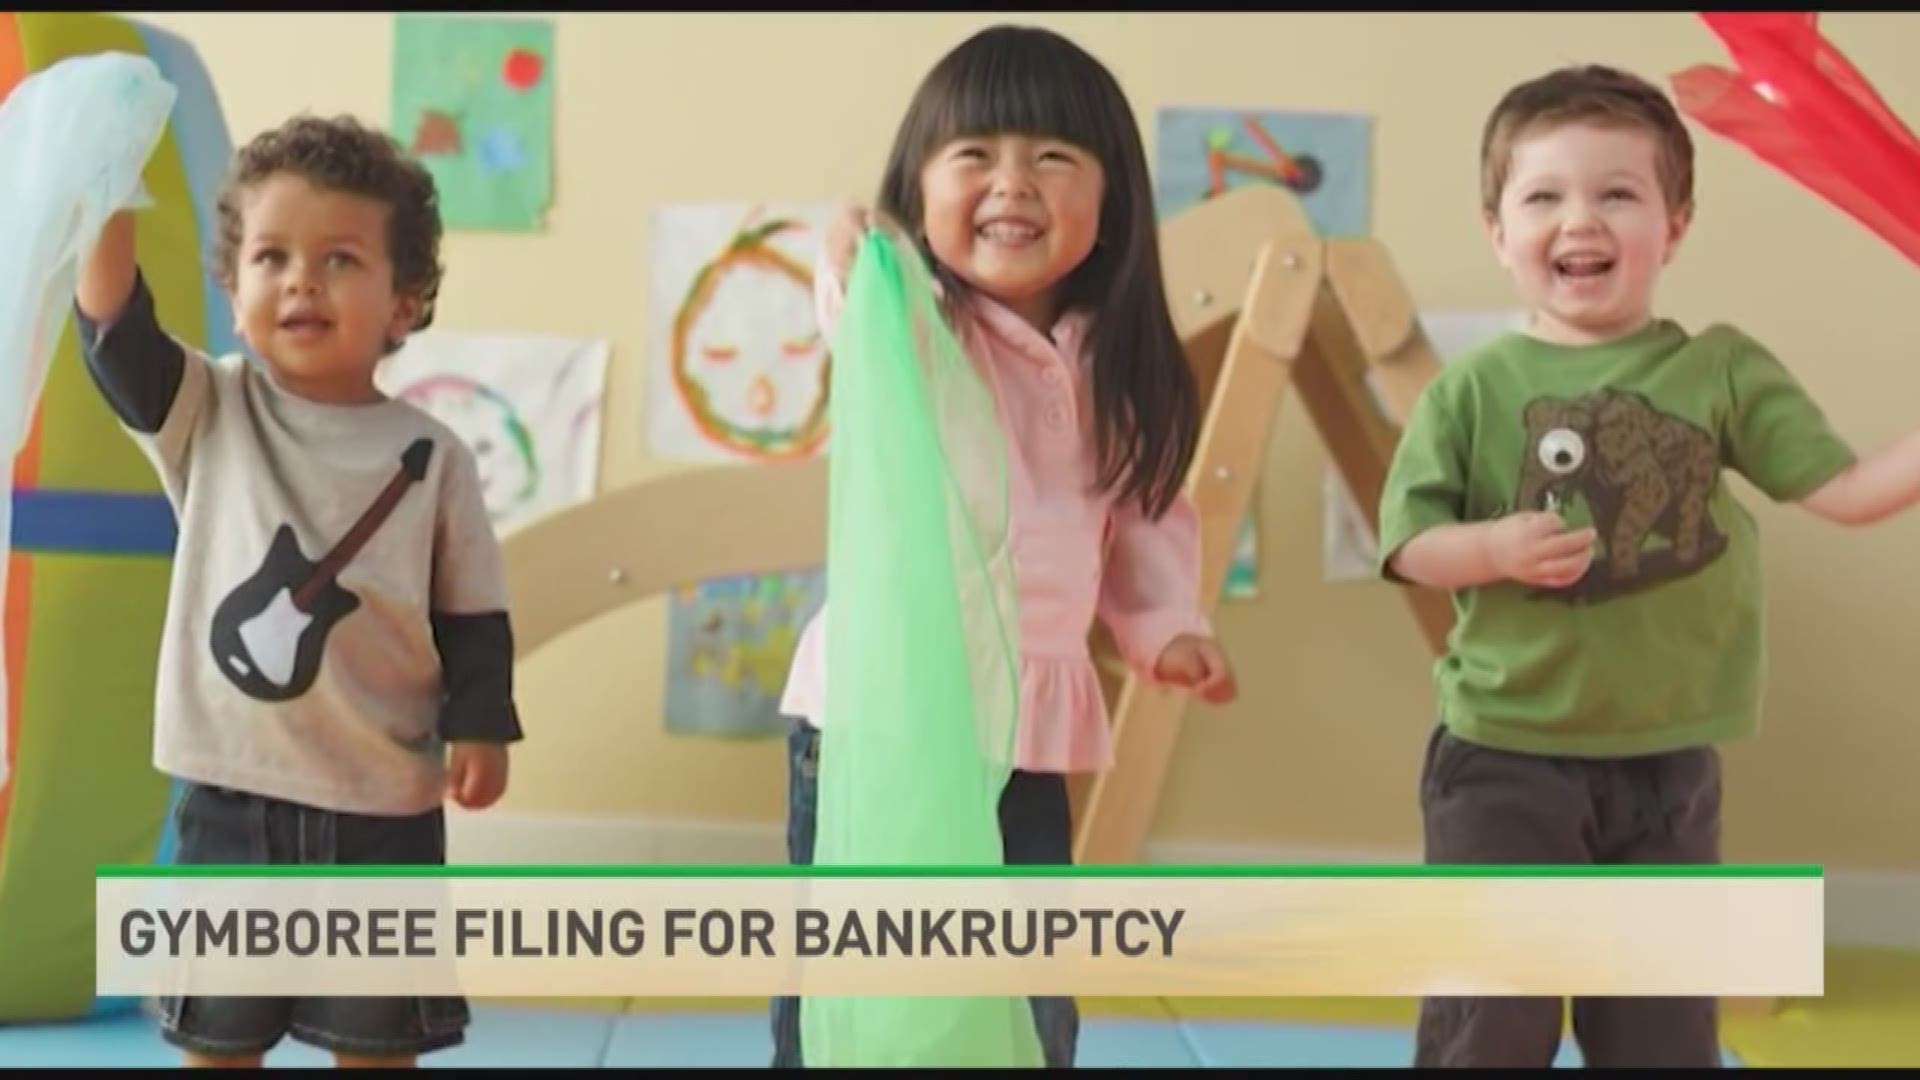 Gymboree filed for Chapter 11 bankruptcy protection.